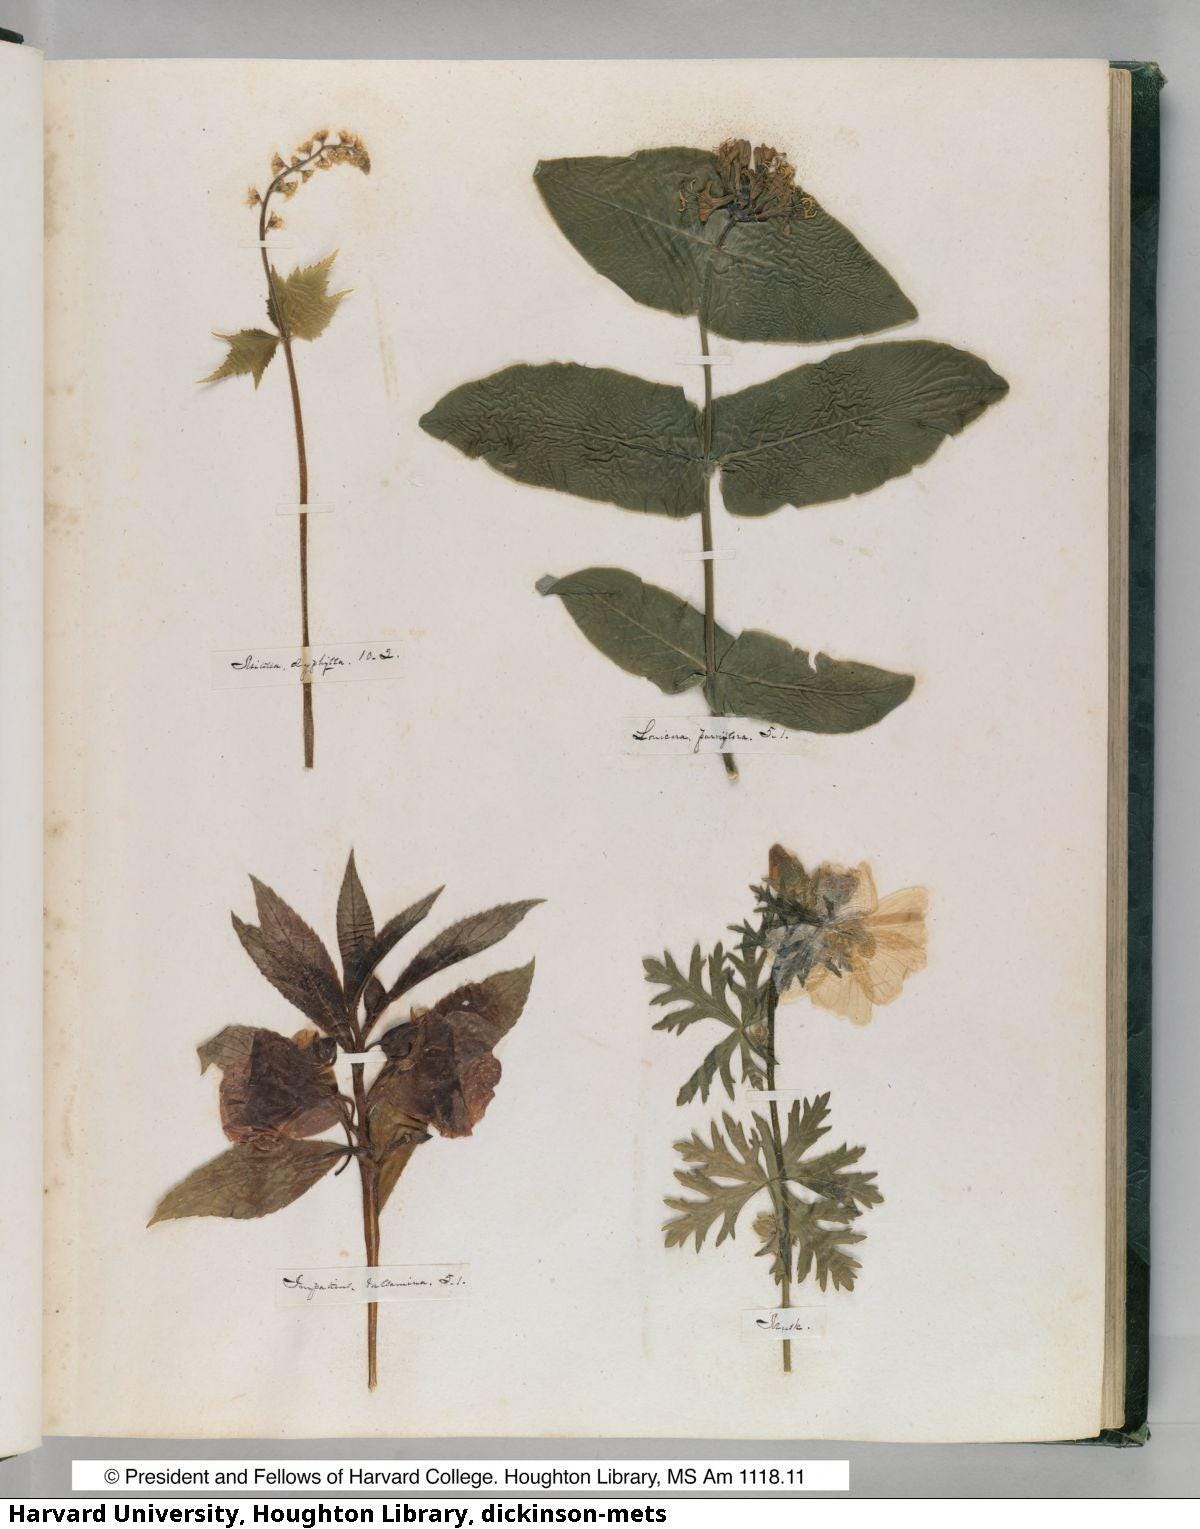 pressed leaves and flowers on the blank page of a journal